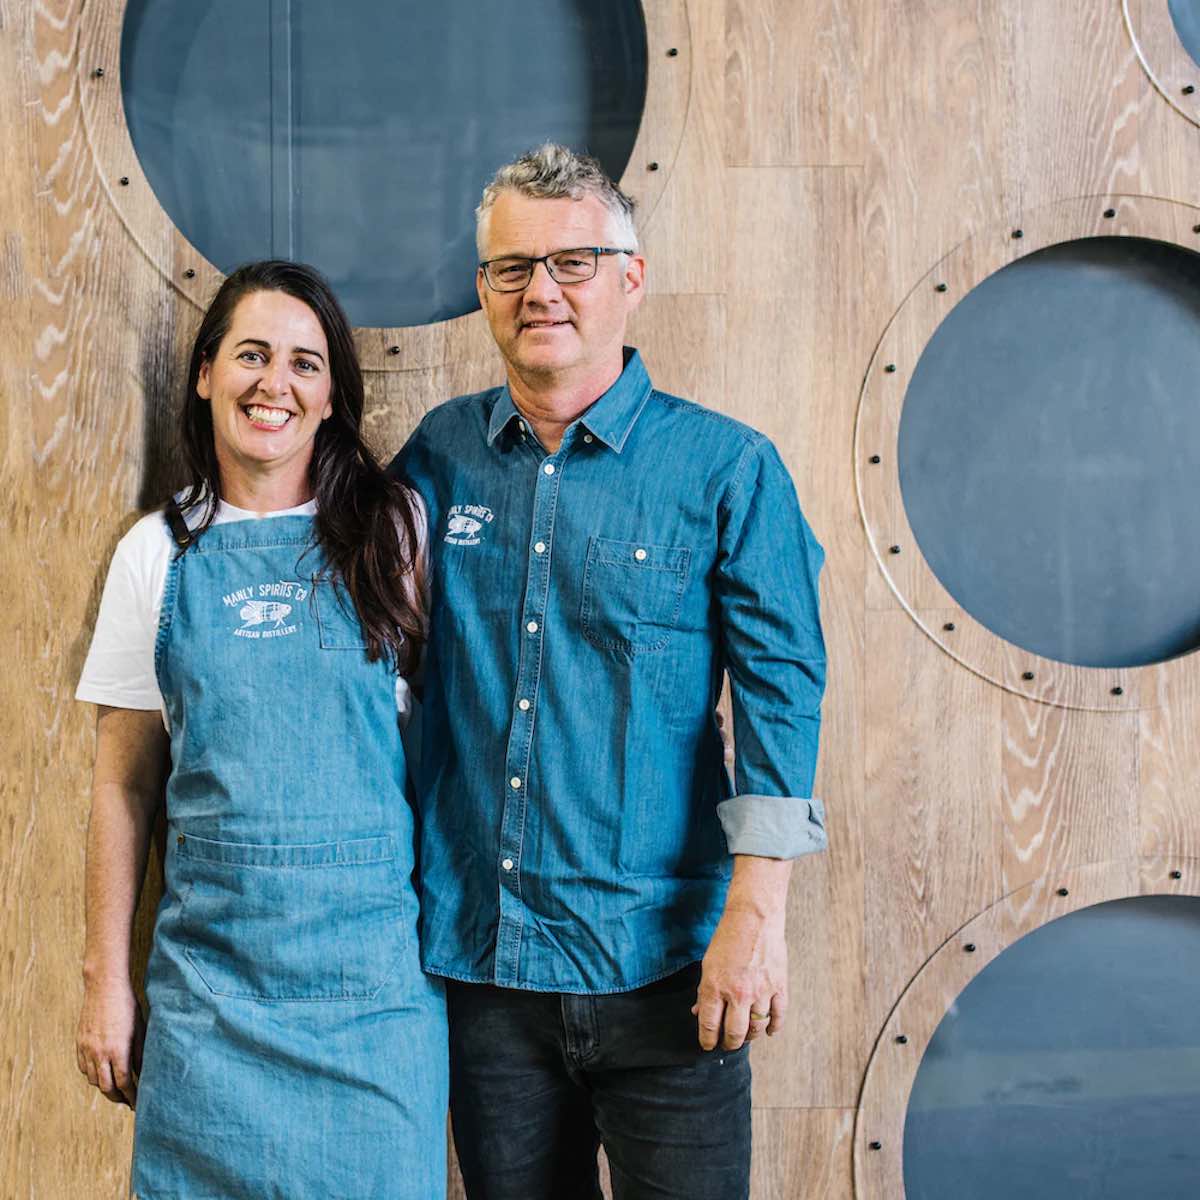 David Whittaker and Vanessa Wilton, Manly Spirits Co